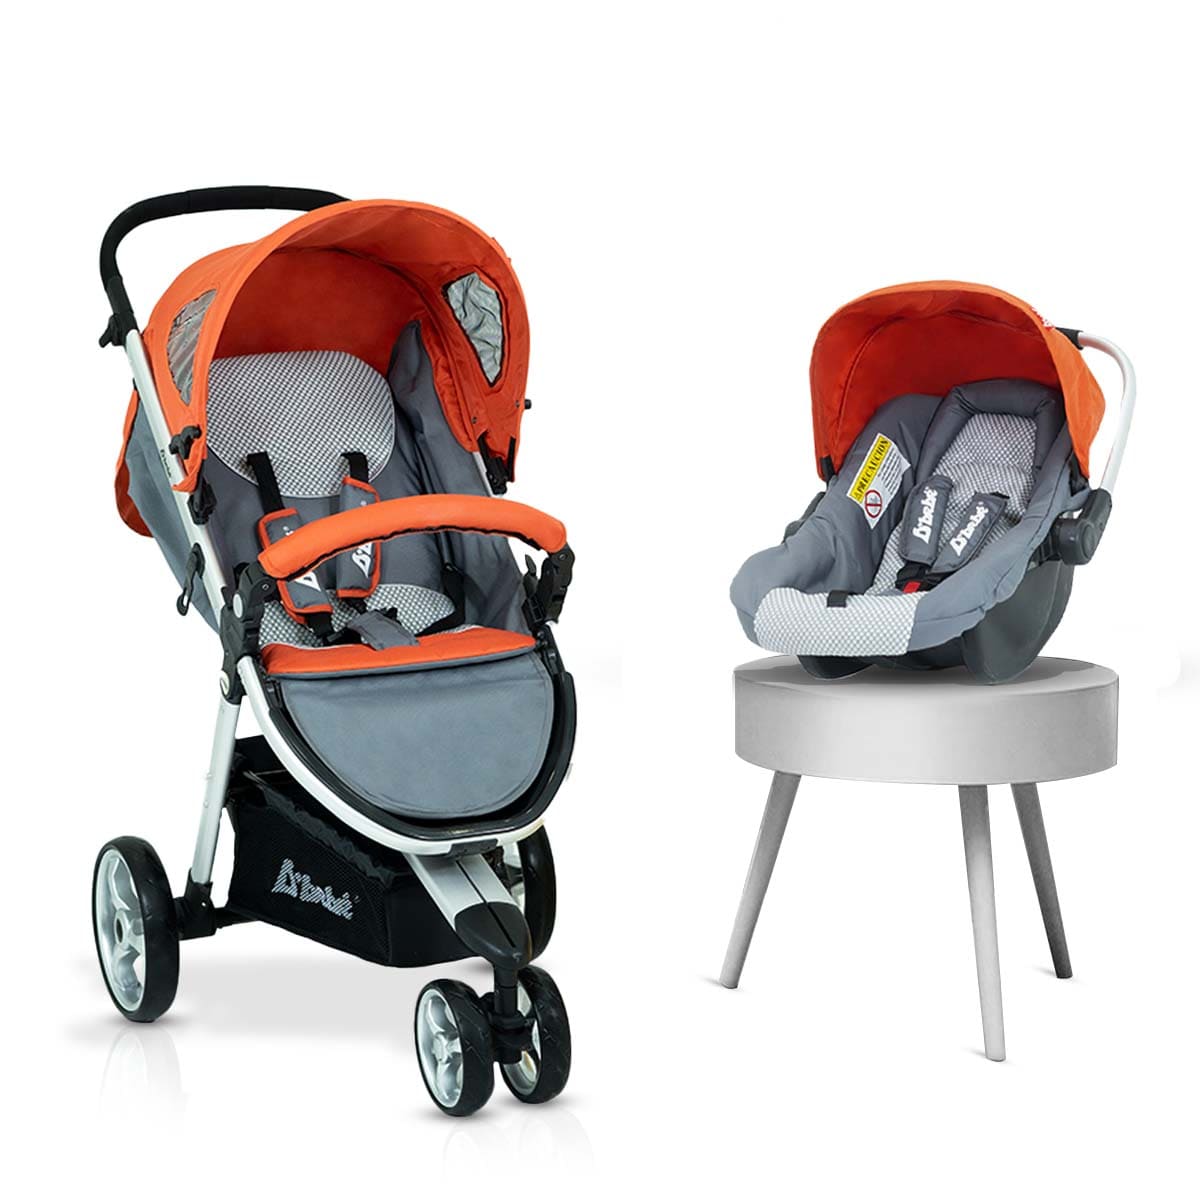 Stroller with Car Seat for Baby - Convenient Travel Solution